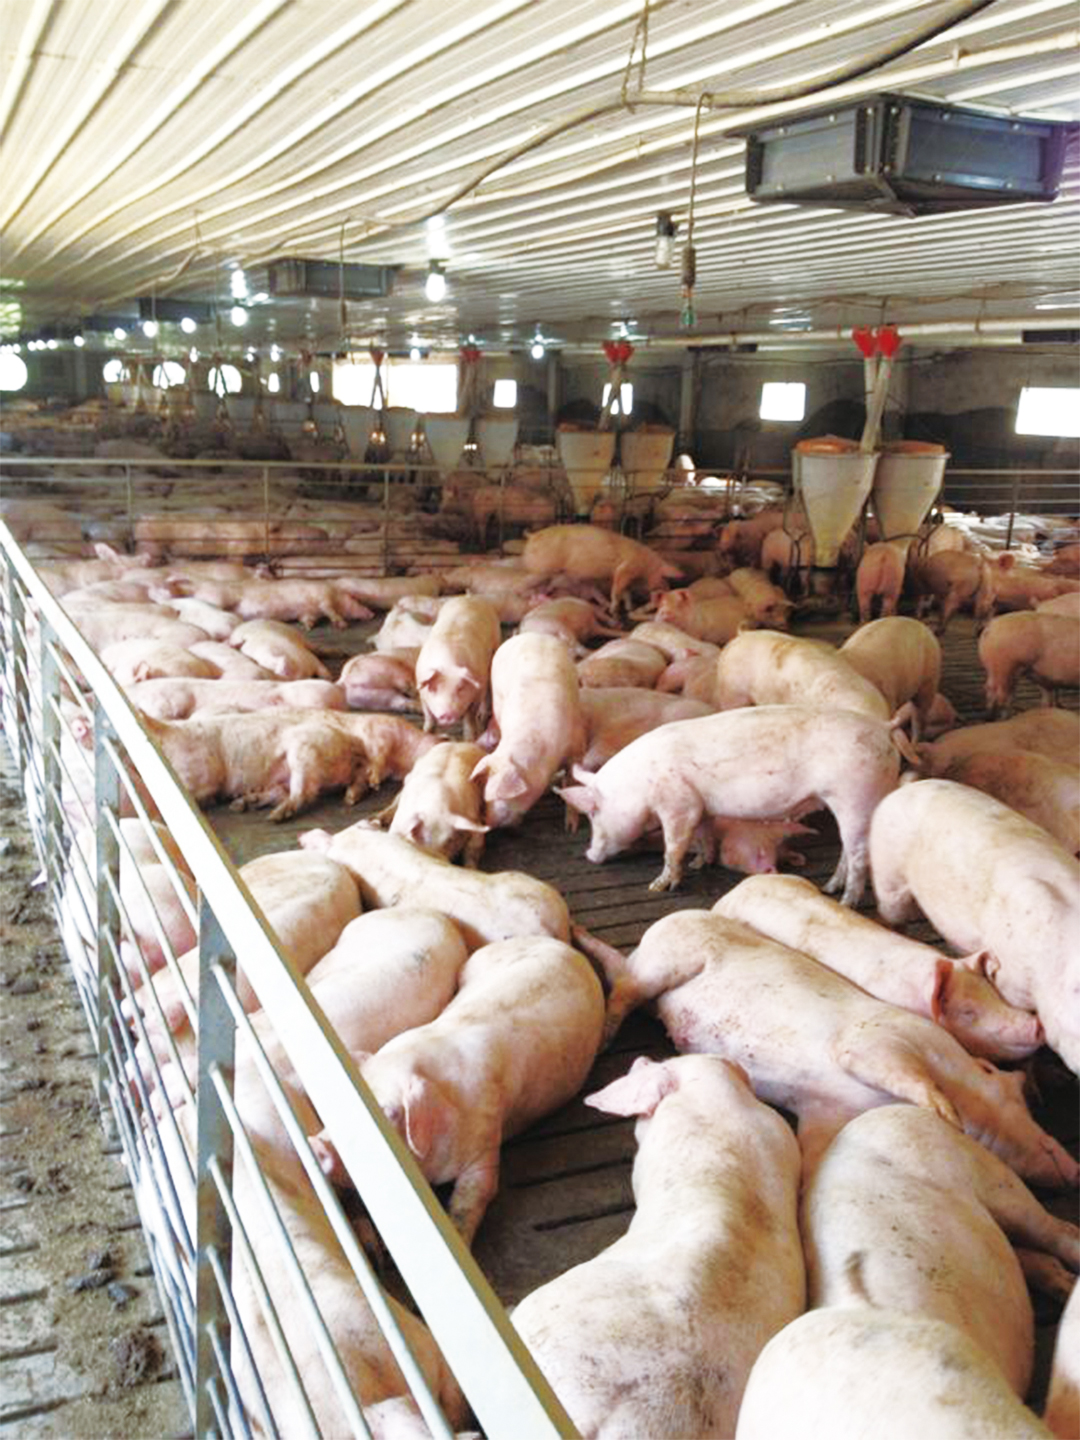 Integration and analysis of pig farm problems